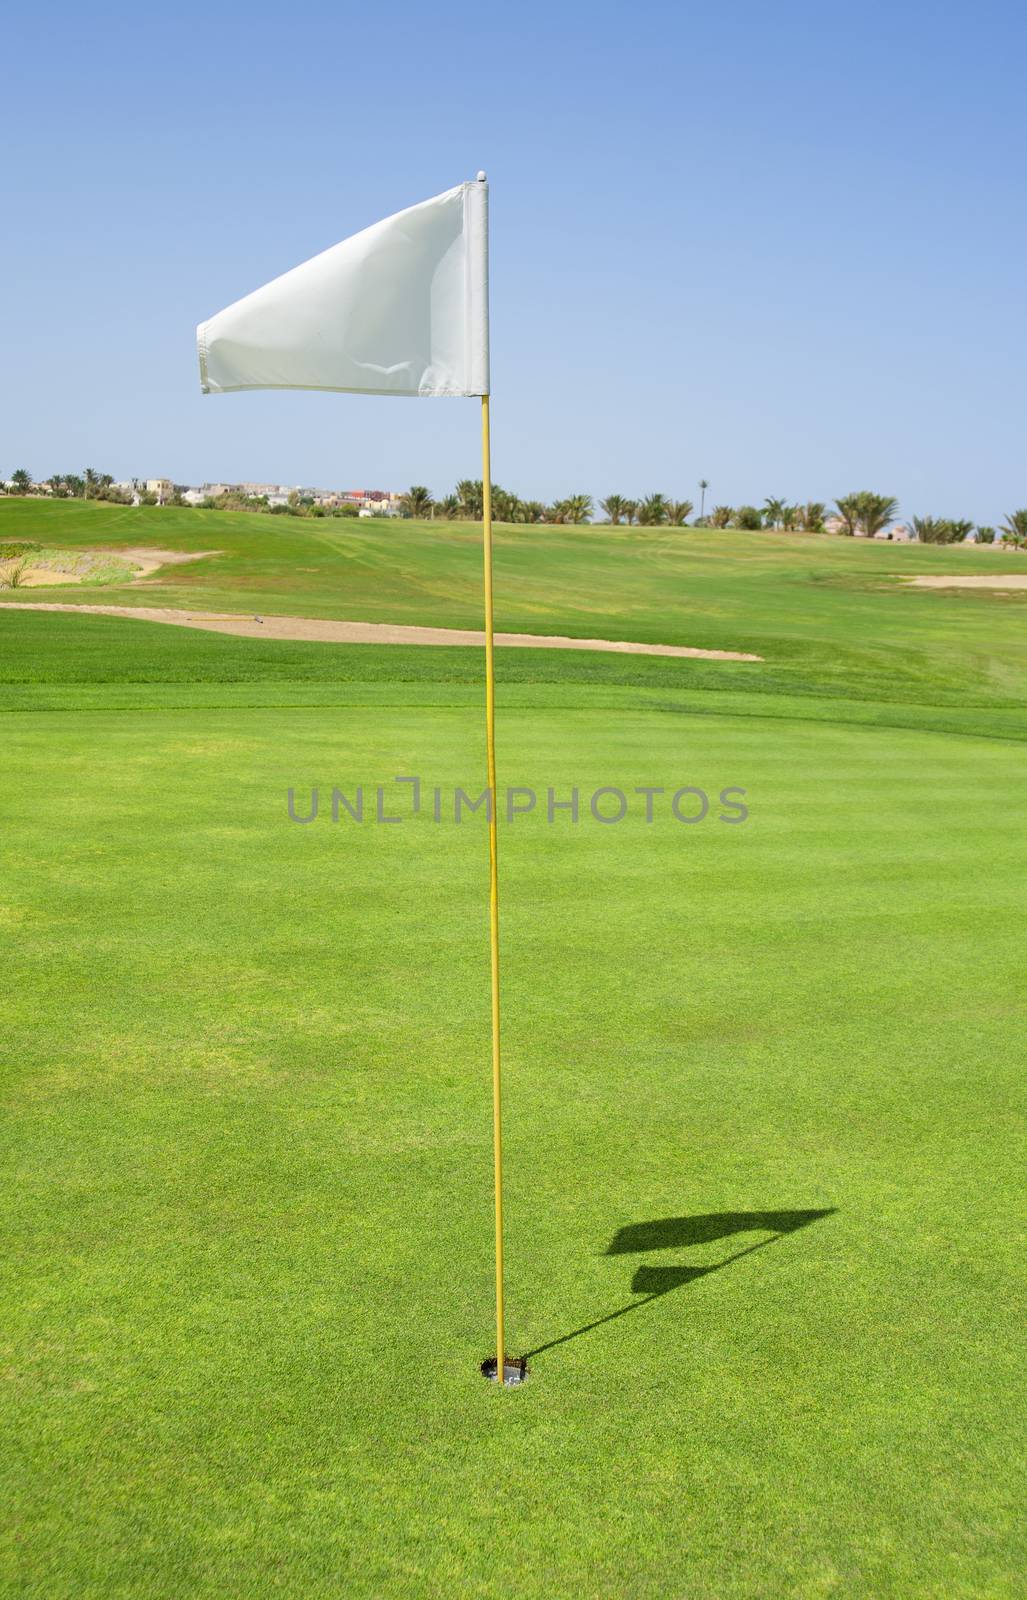 Golf flag in the hole on a couse green